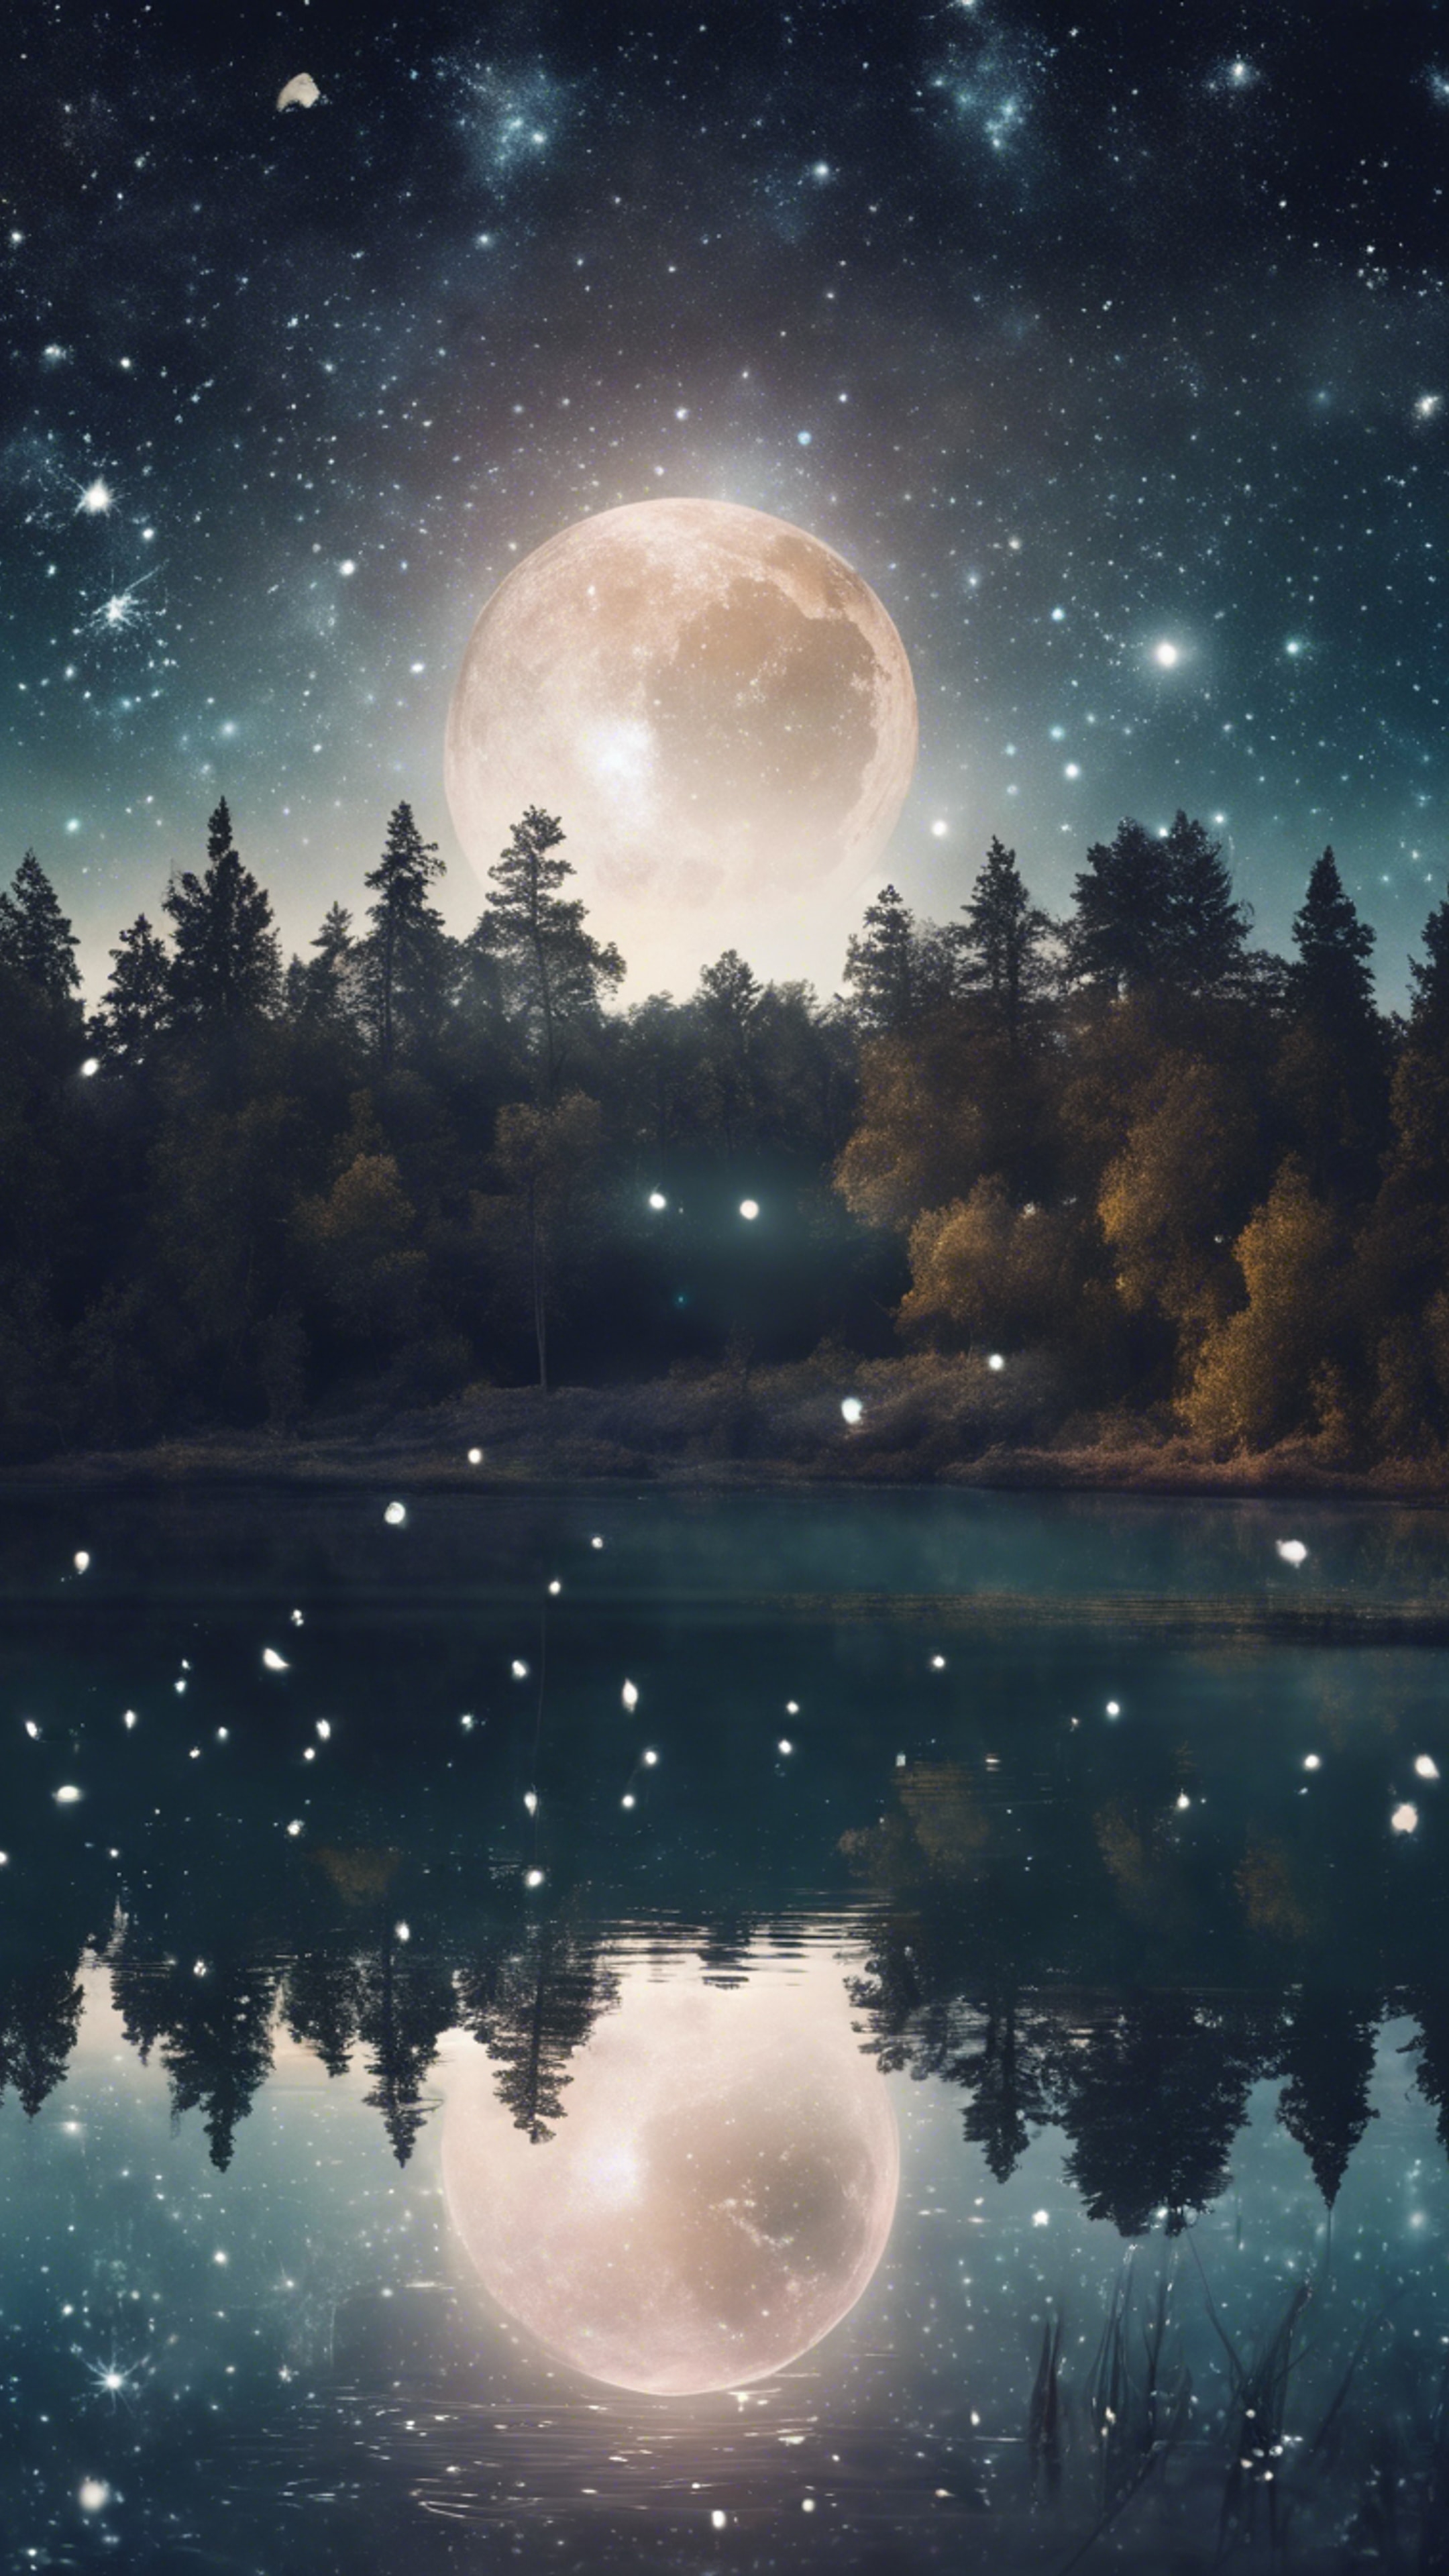 A mystical night sky over a tranquil lake, filled with sparkling constellations and a magical, translucent moon. Обои[02f115e6e6dc4626b628]